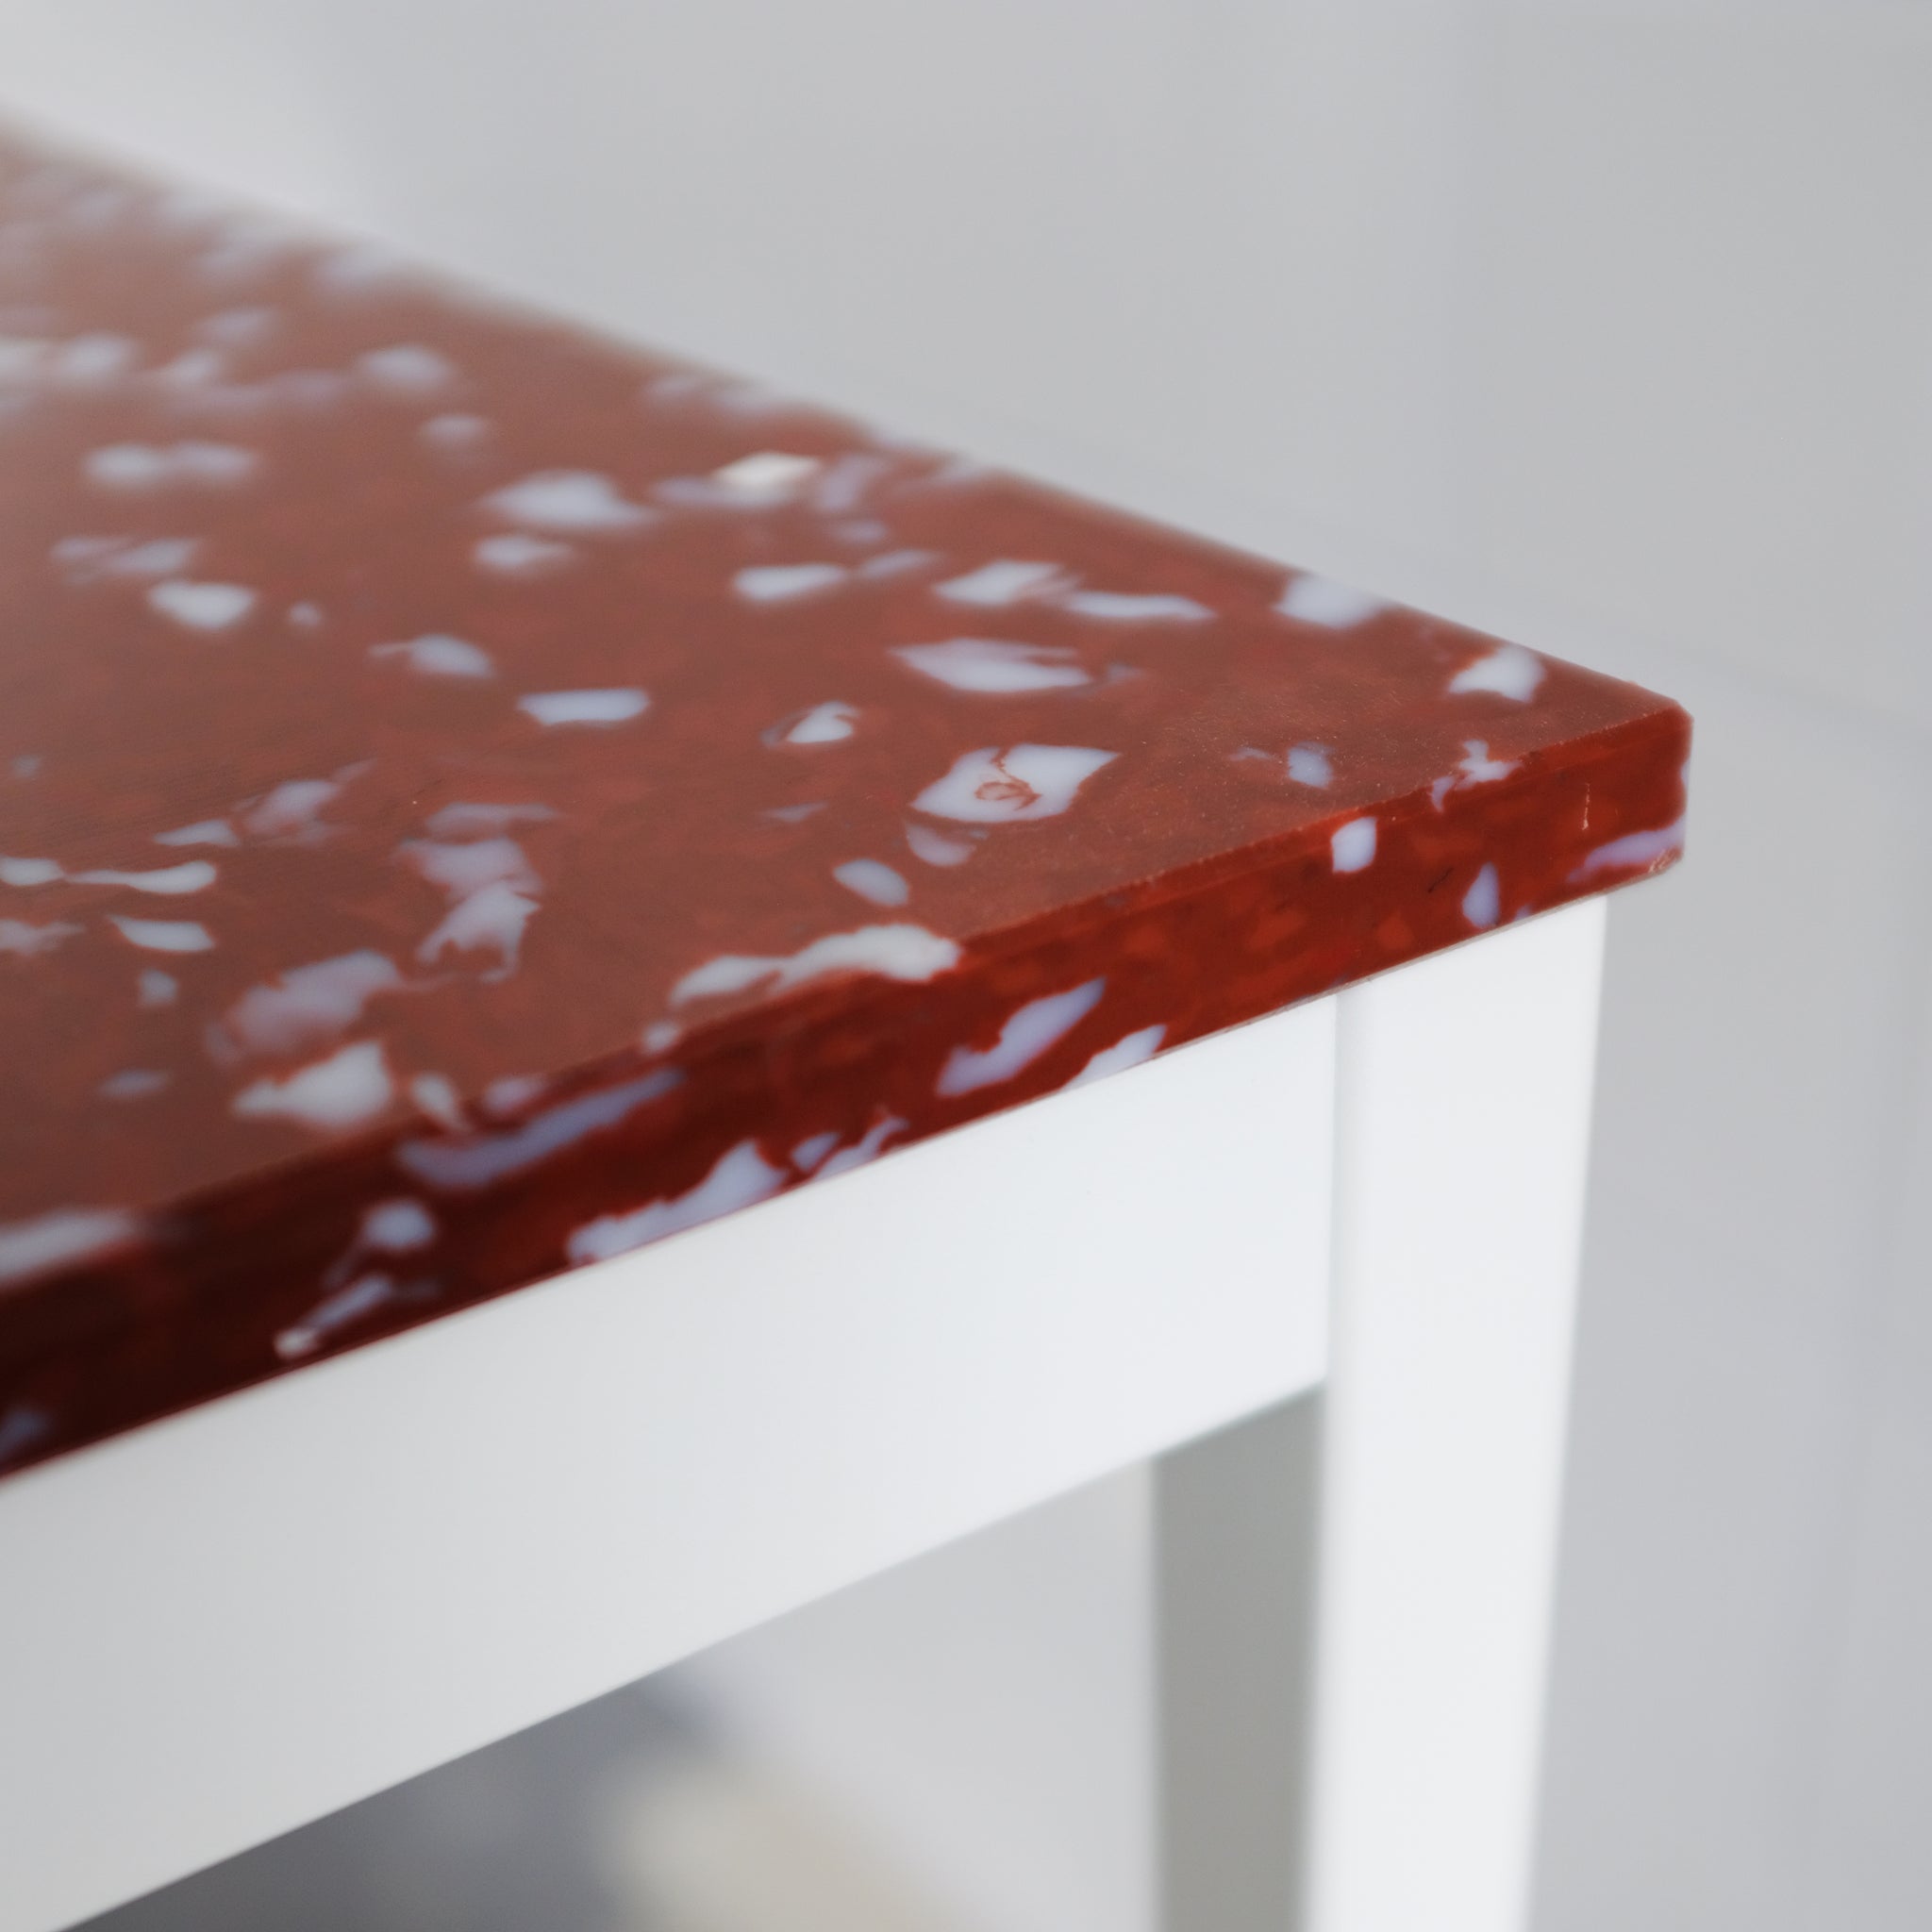 DETAIL OF RED TOP AND WHITE LEGS HIGH TABLE BY THE MINIMONO PROJECT - BRAND FOR ECO FRIENDLY - PLAYFUL - MULTI FUNCTIONAL - SUSTAINABLE - HIGH QUALITY - DESIGN FURNITURE FROM RECYCLED PLASTIC FOR BOTH ADULT AND CHILDREN MADE IN BERLIN GERMANY